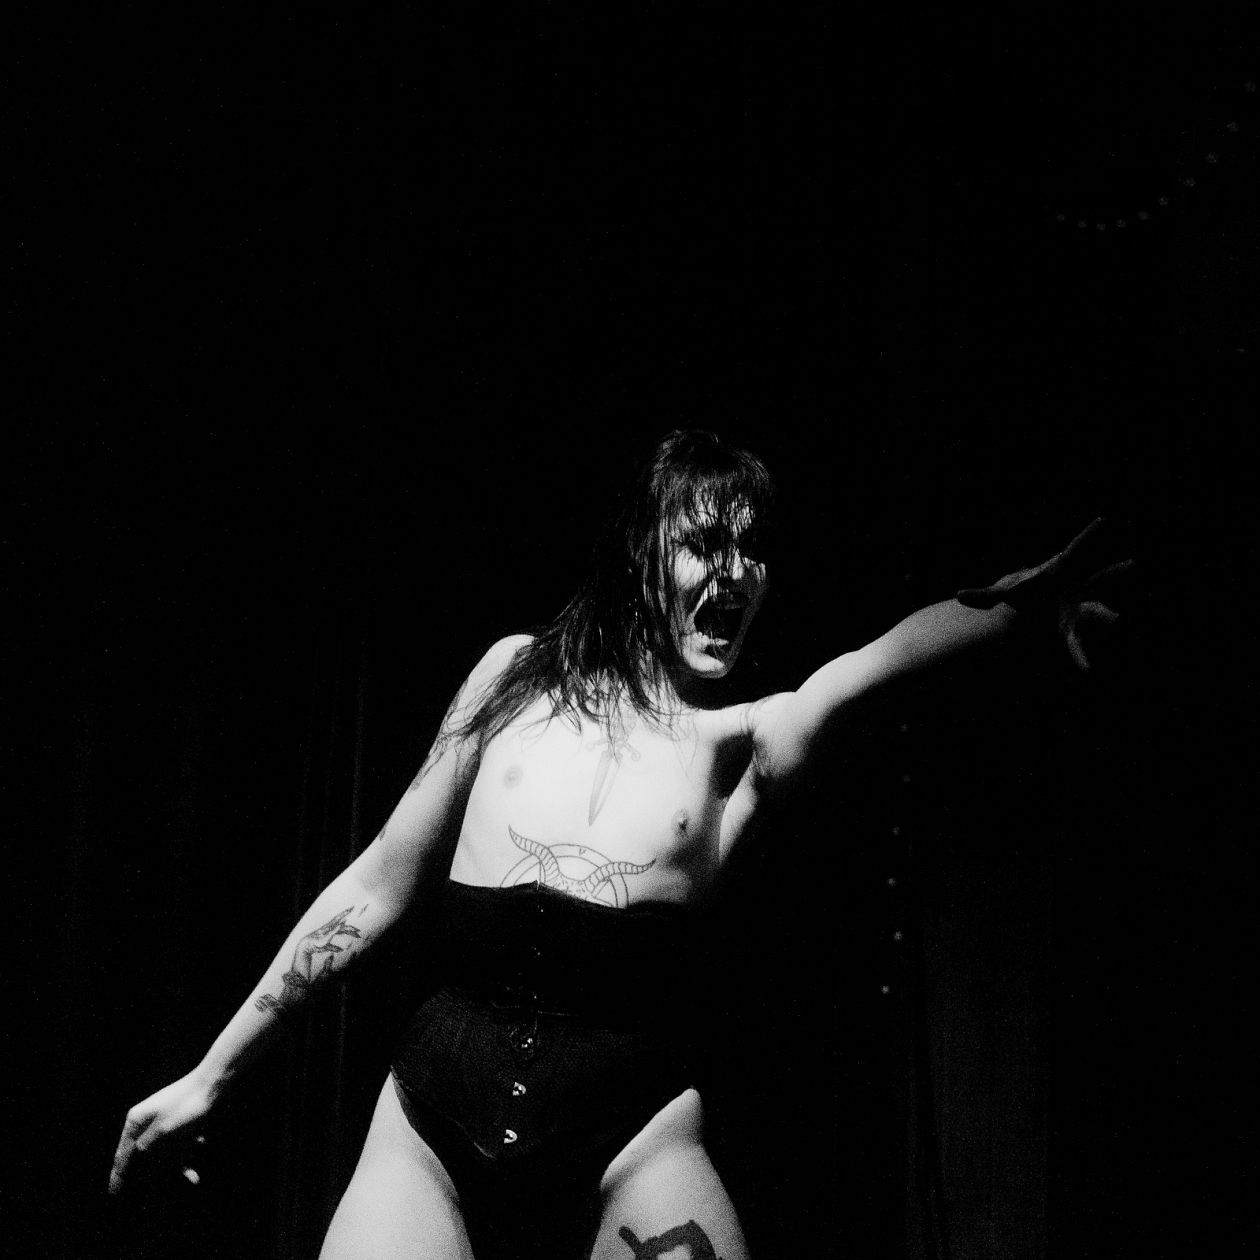 Member of the drag queen collective Canapé Chucrut performing in a bar in Valencia, Spain